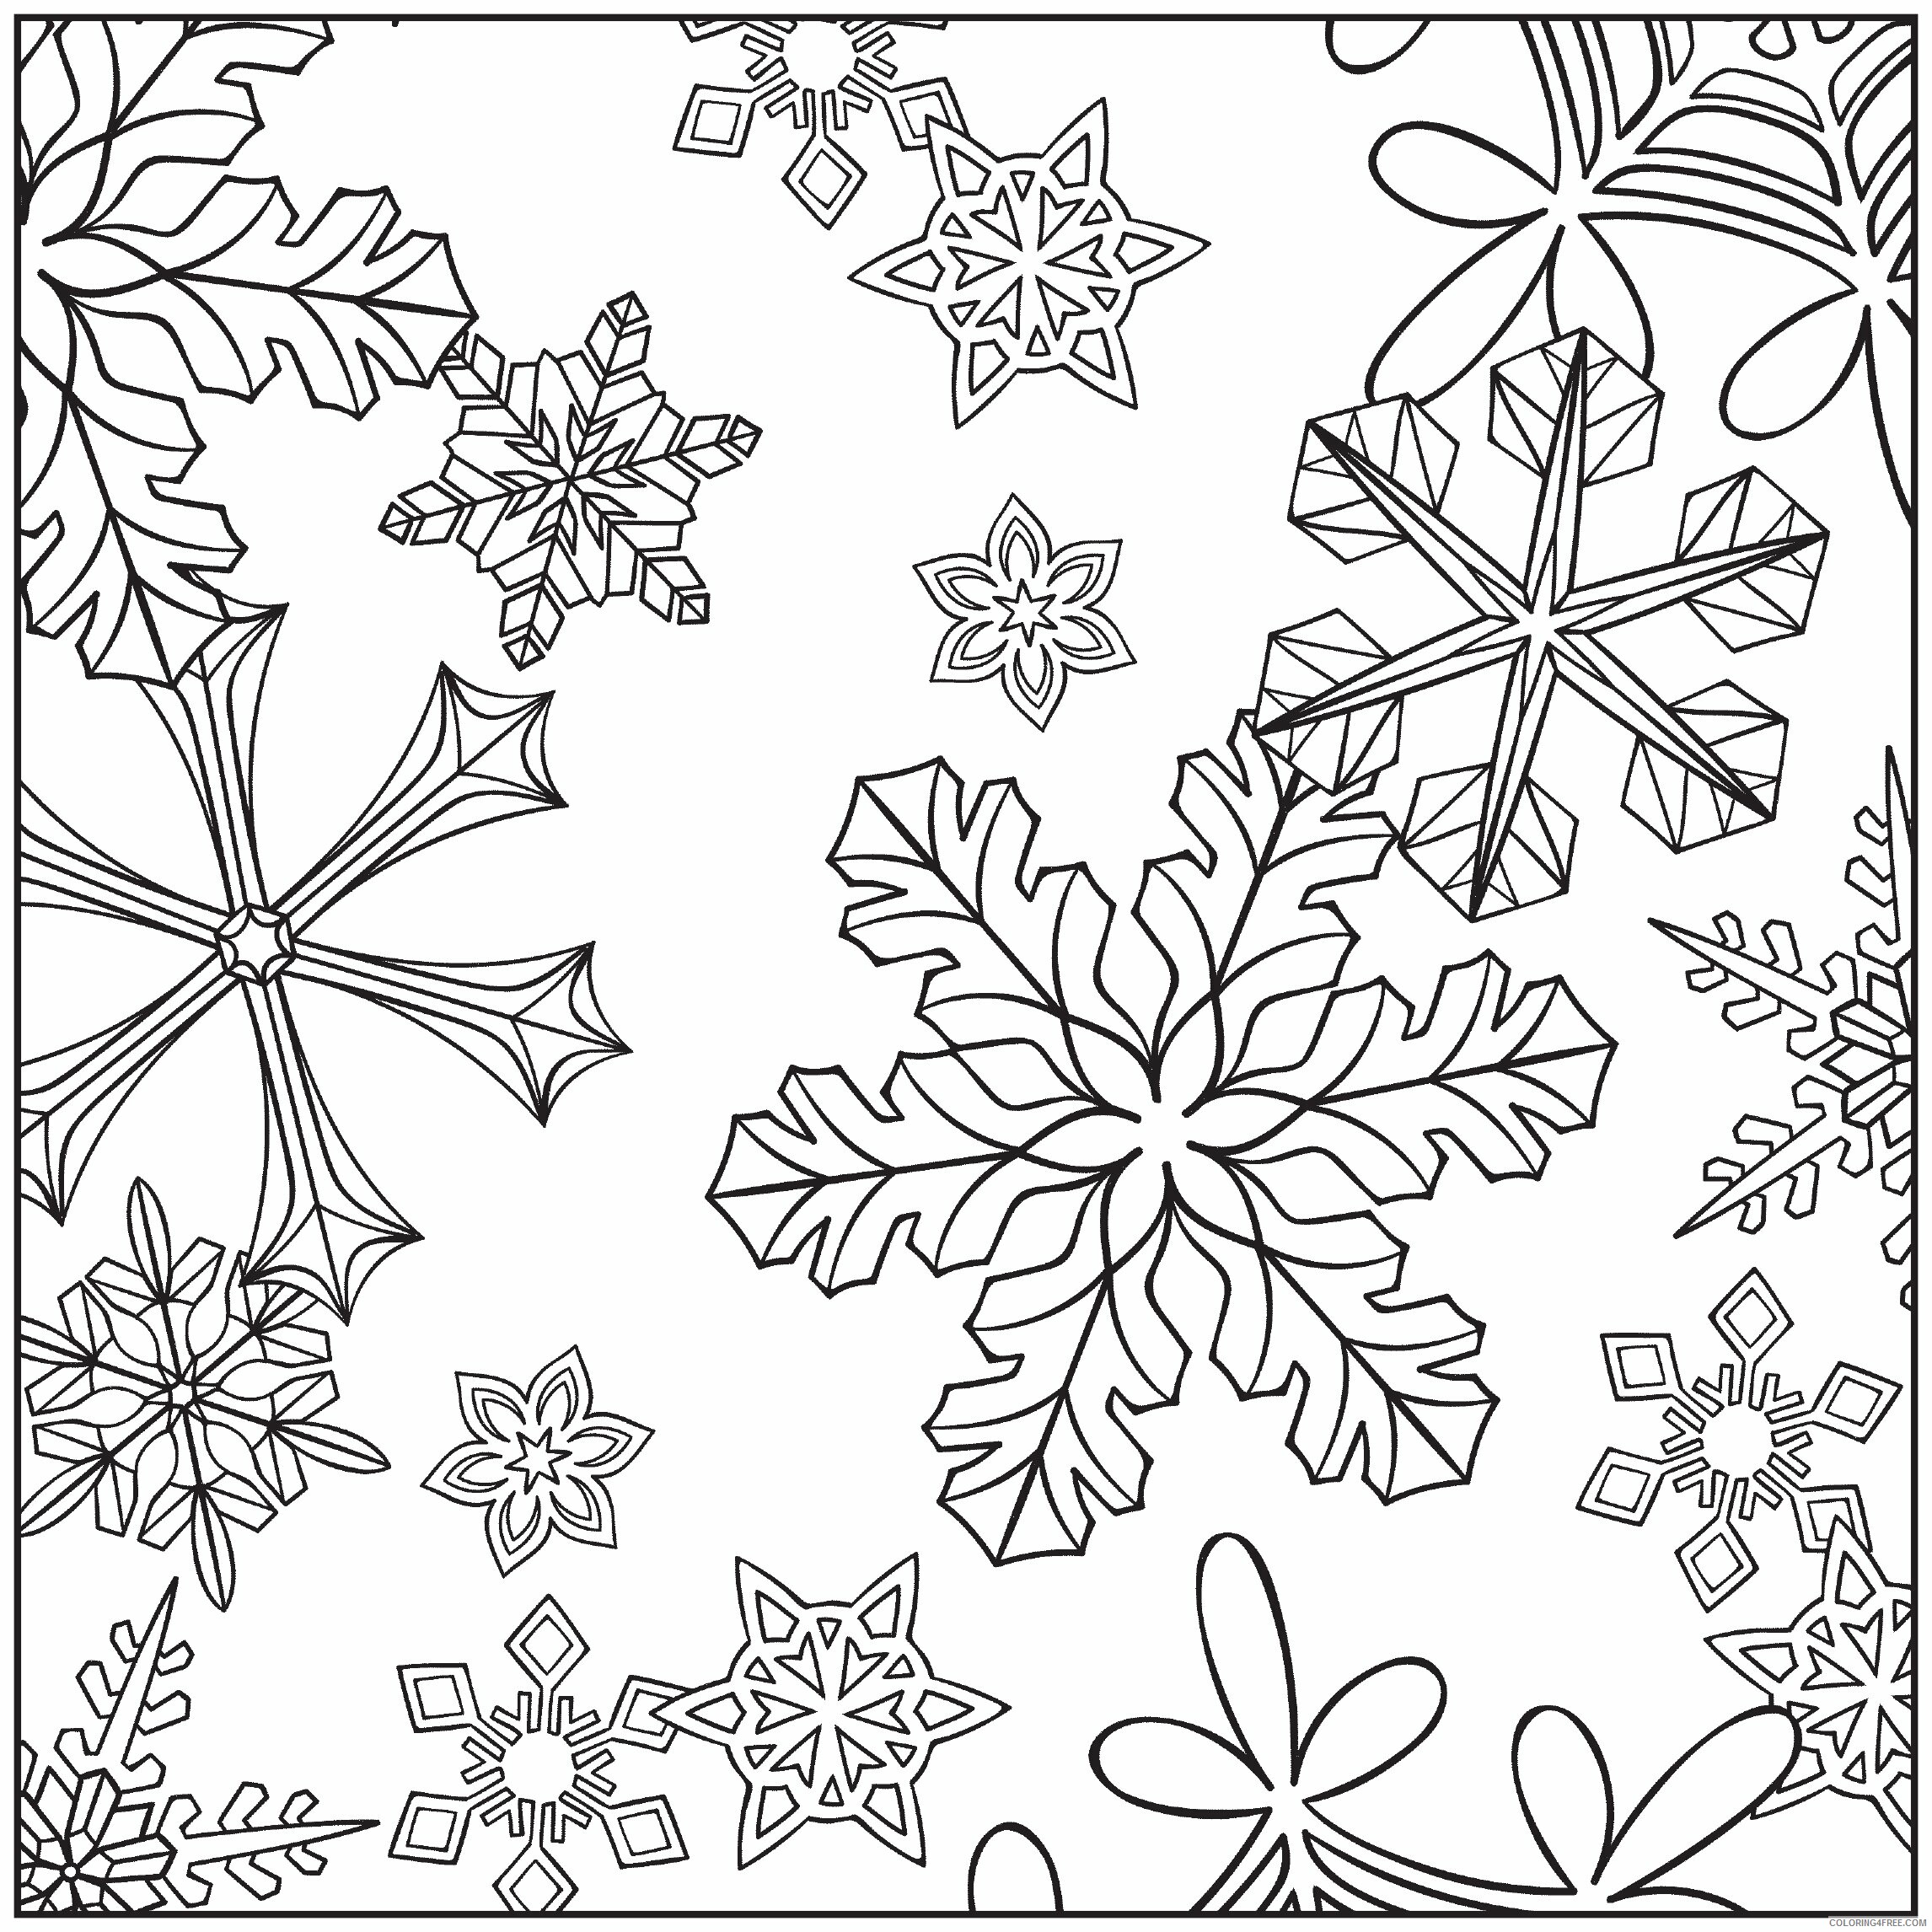 Snowflake Coloring Pages Snowflake Winter for Adults Printable 2021 5522 Coloring4free